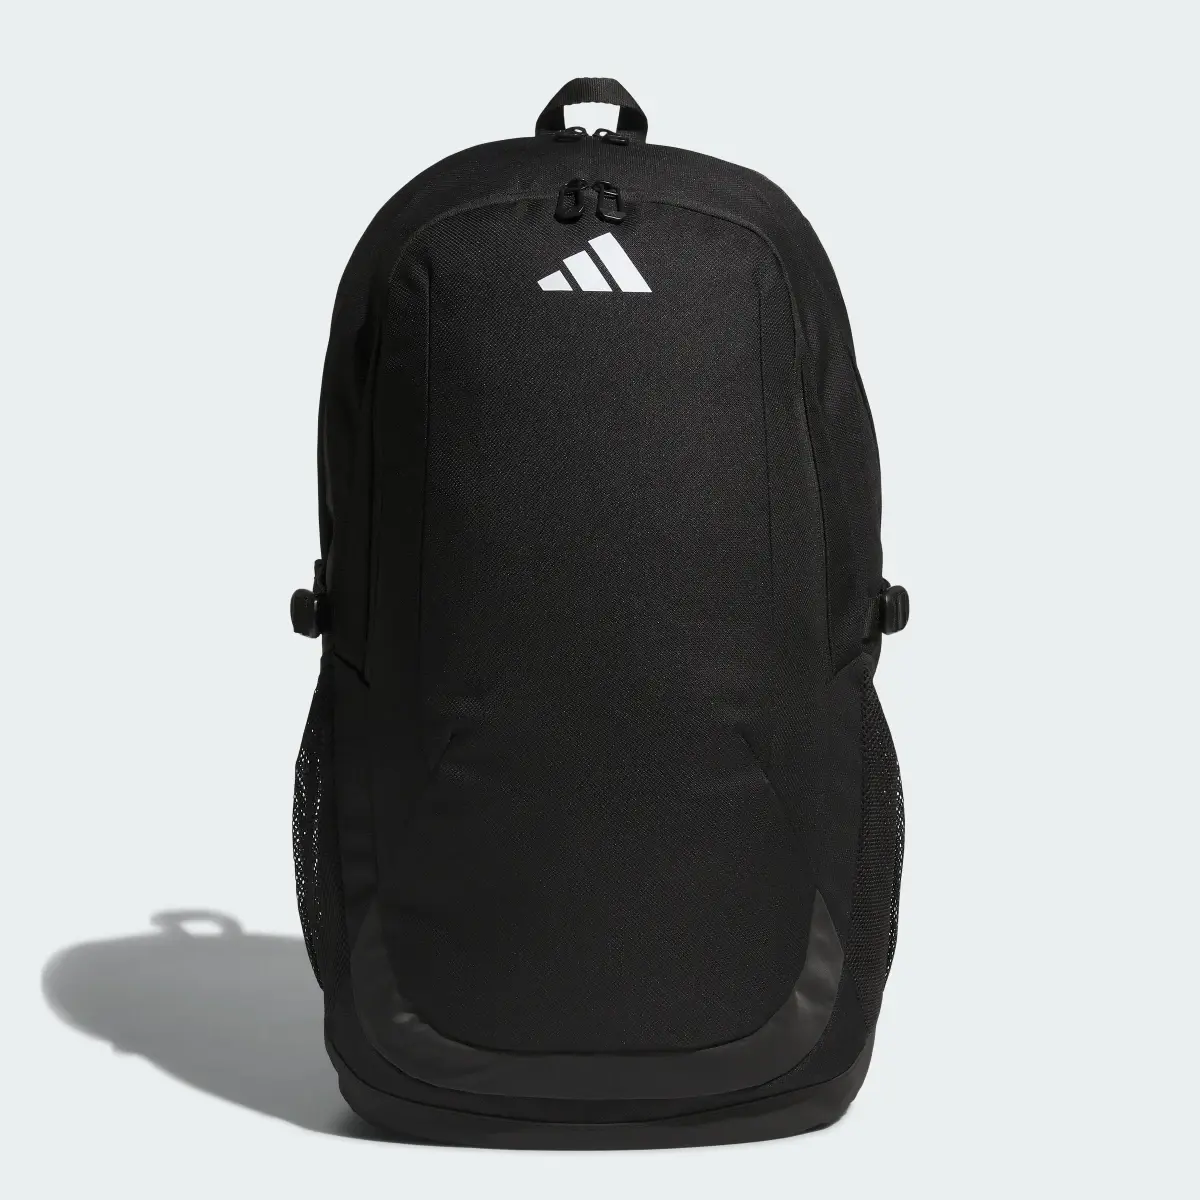 Adidas EP/Syst. Team Backpack 35 L. 1